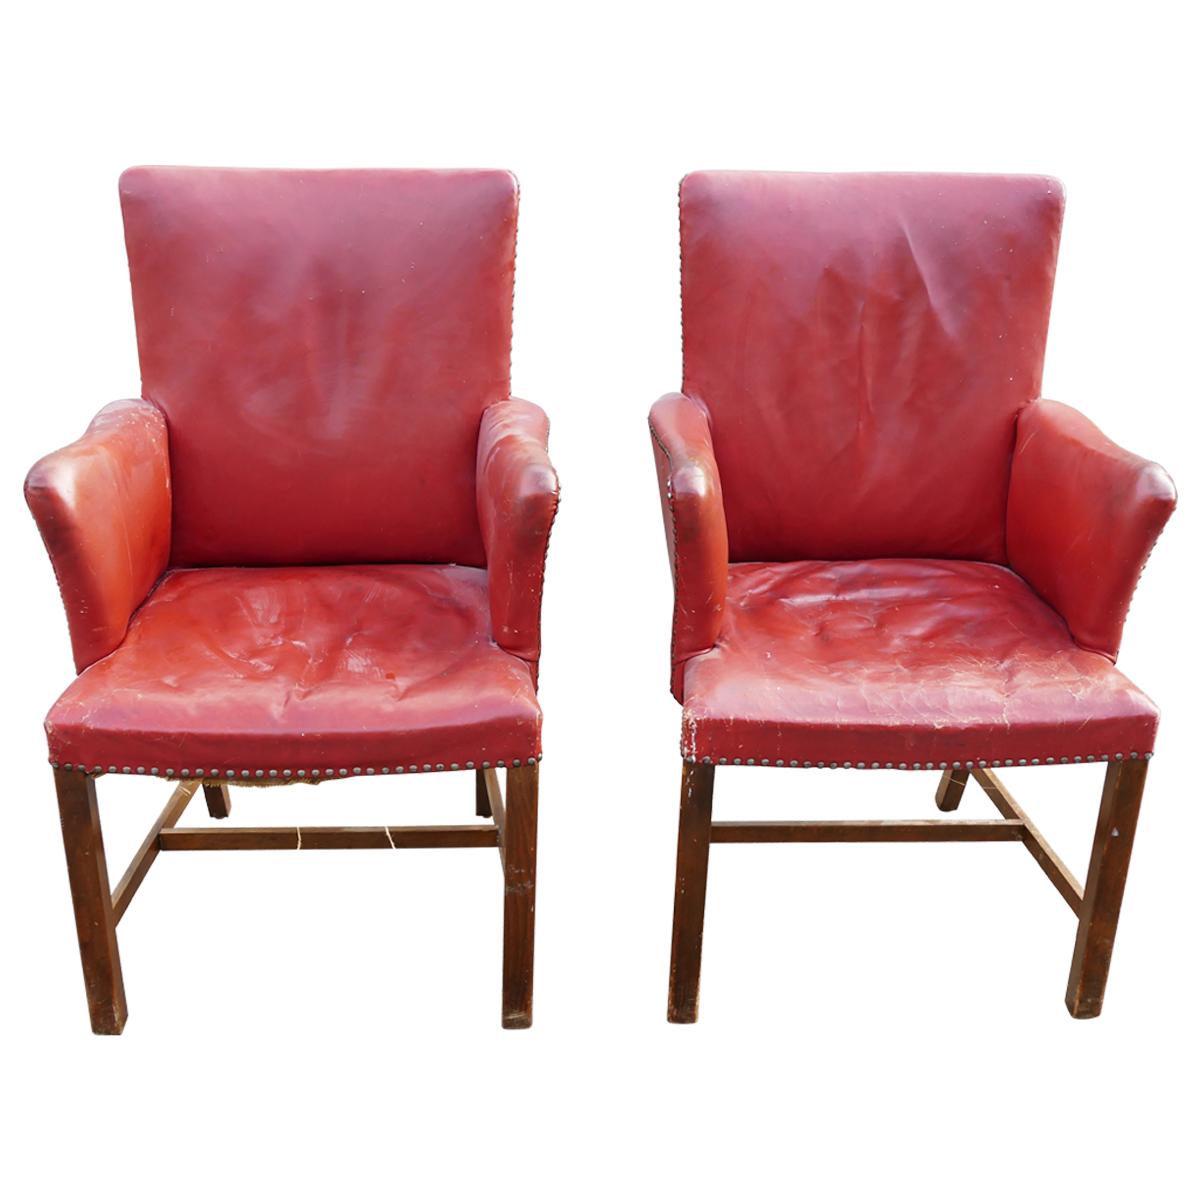 Pair of Danish armchairs from the 1930s in the style of Kaare Klint